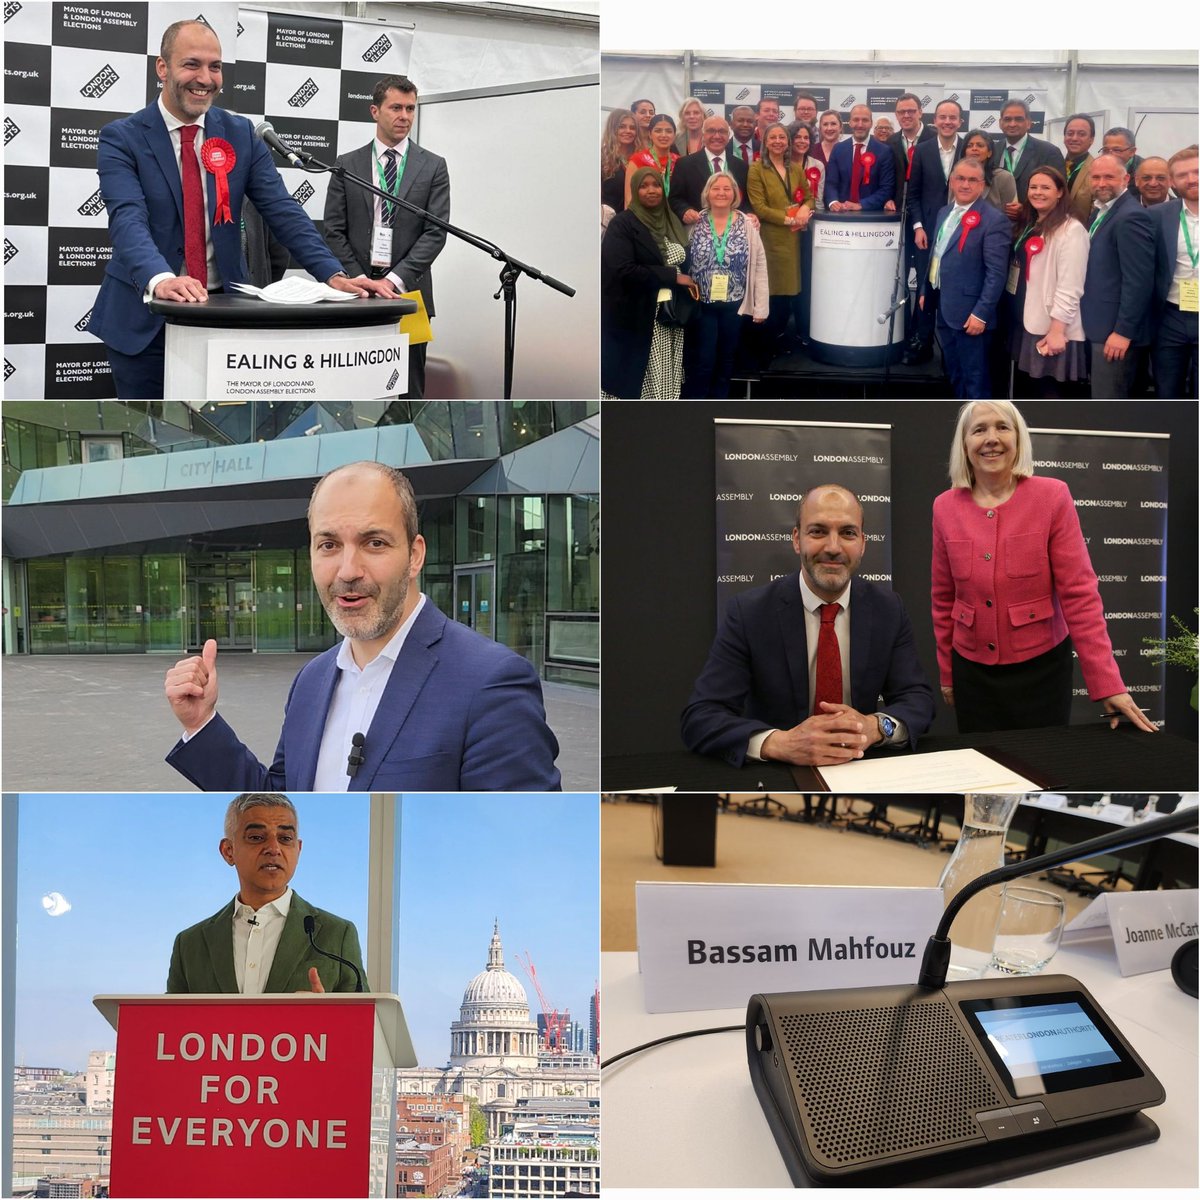 Fab 1st week in the role: ✅ Election: Won ✅ Sworn in ✅ Sadiq sworn in for historic 3rd term ✅ First meeting with Ealing North members as new Assembly Member ✅ London Assembly AGM ✅ Committees allocated ✅ Mayor's Questions submitted ✅ Sun: shining 🌞😎 Ready to go!